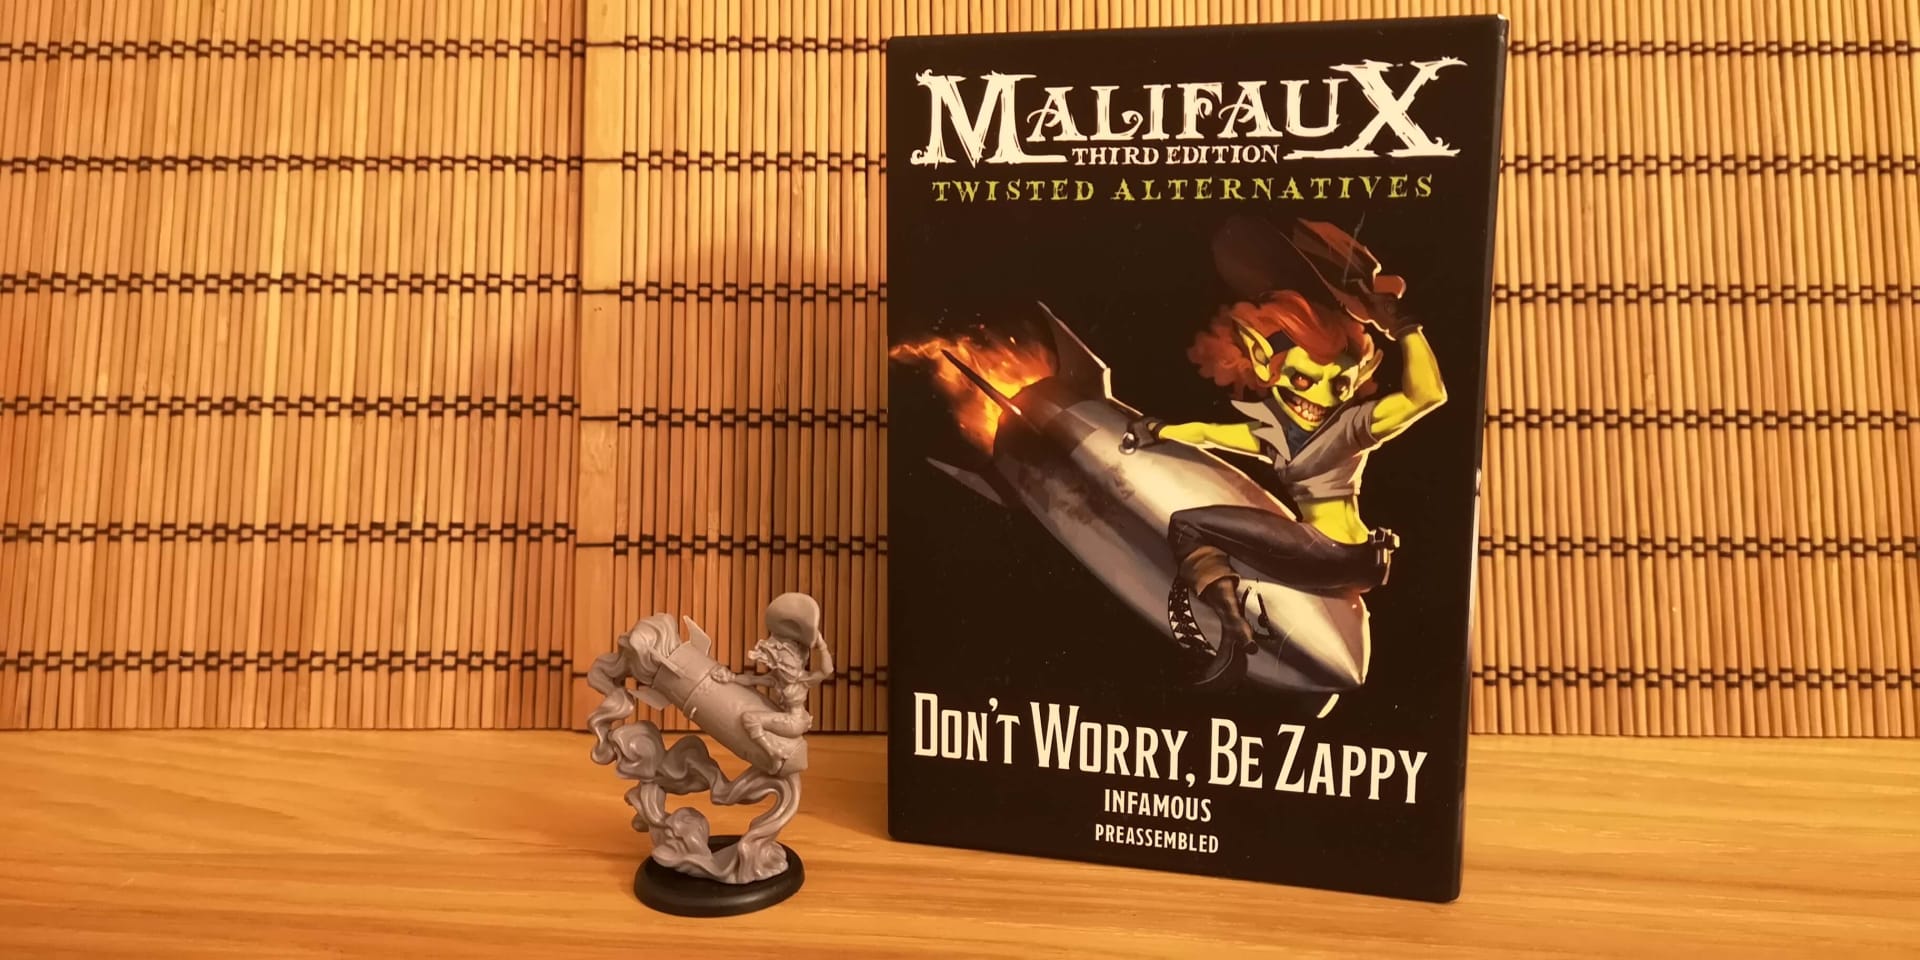 Malifaux Don't Worry Be Zappy Box and Miniature.